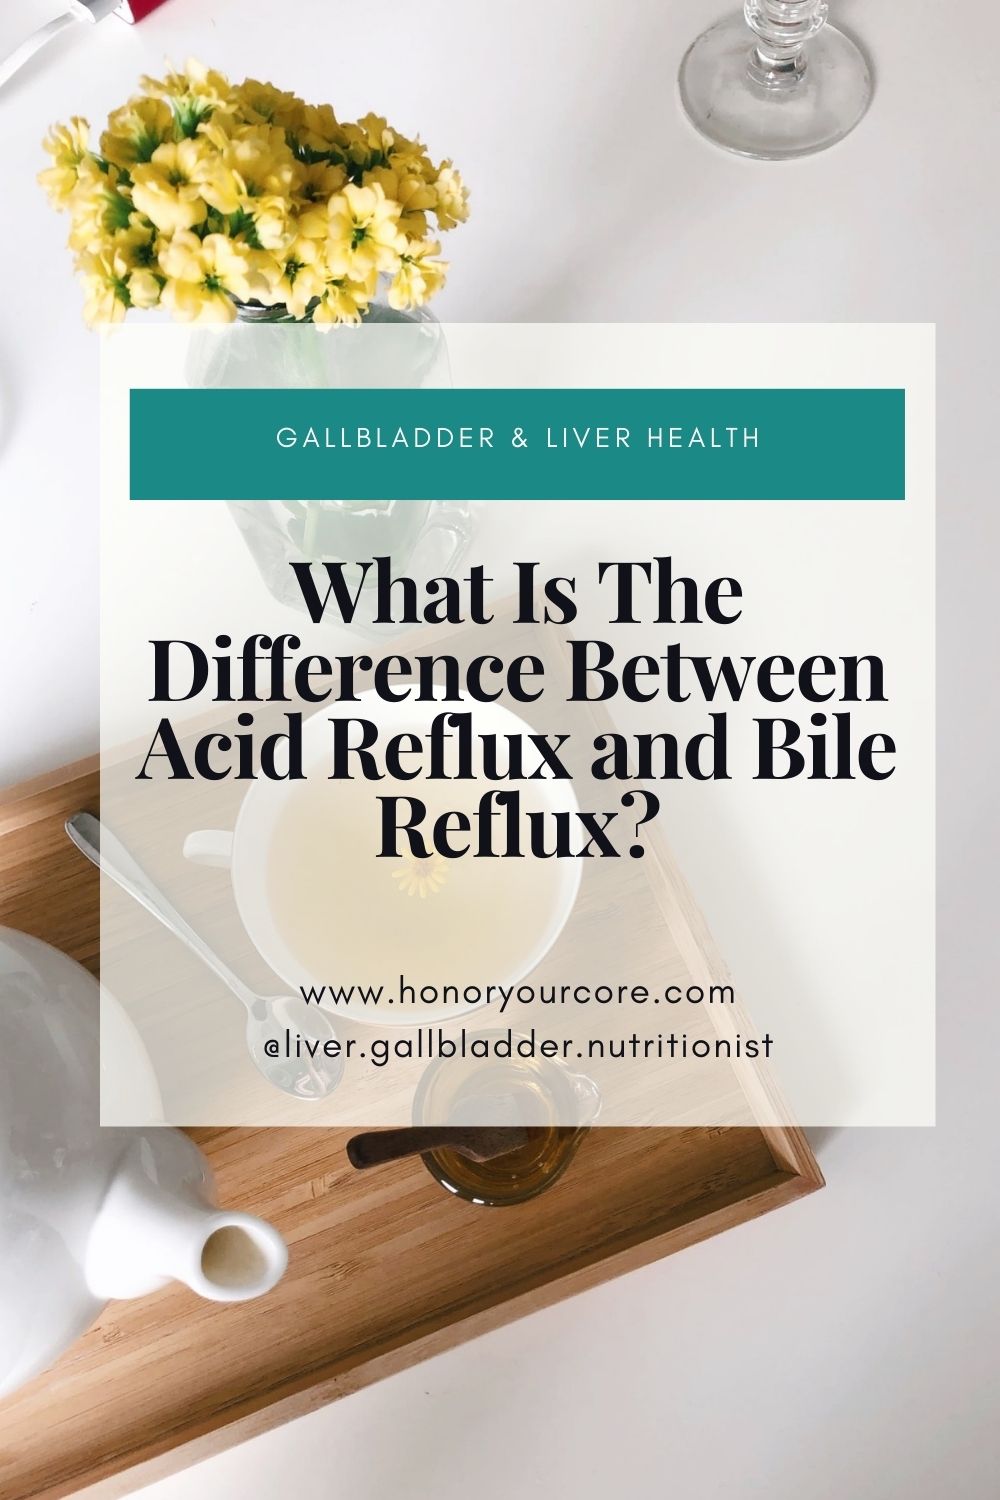 What Is The Difference Between Acid Reflux and Bile Reflux?